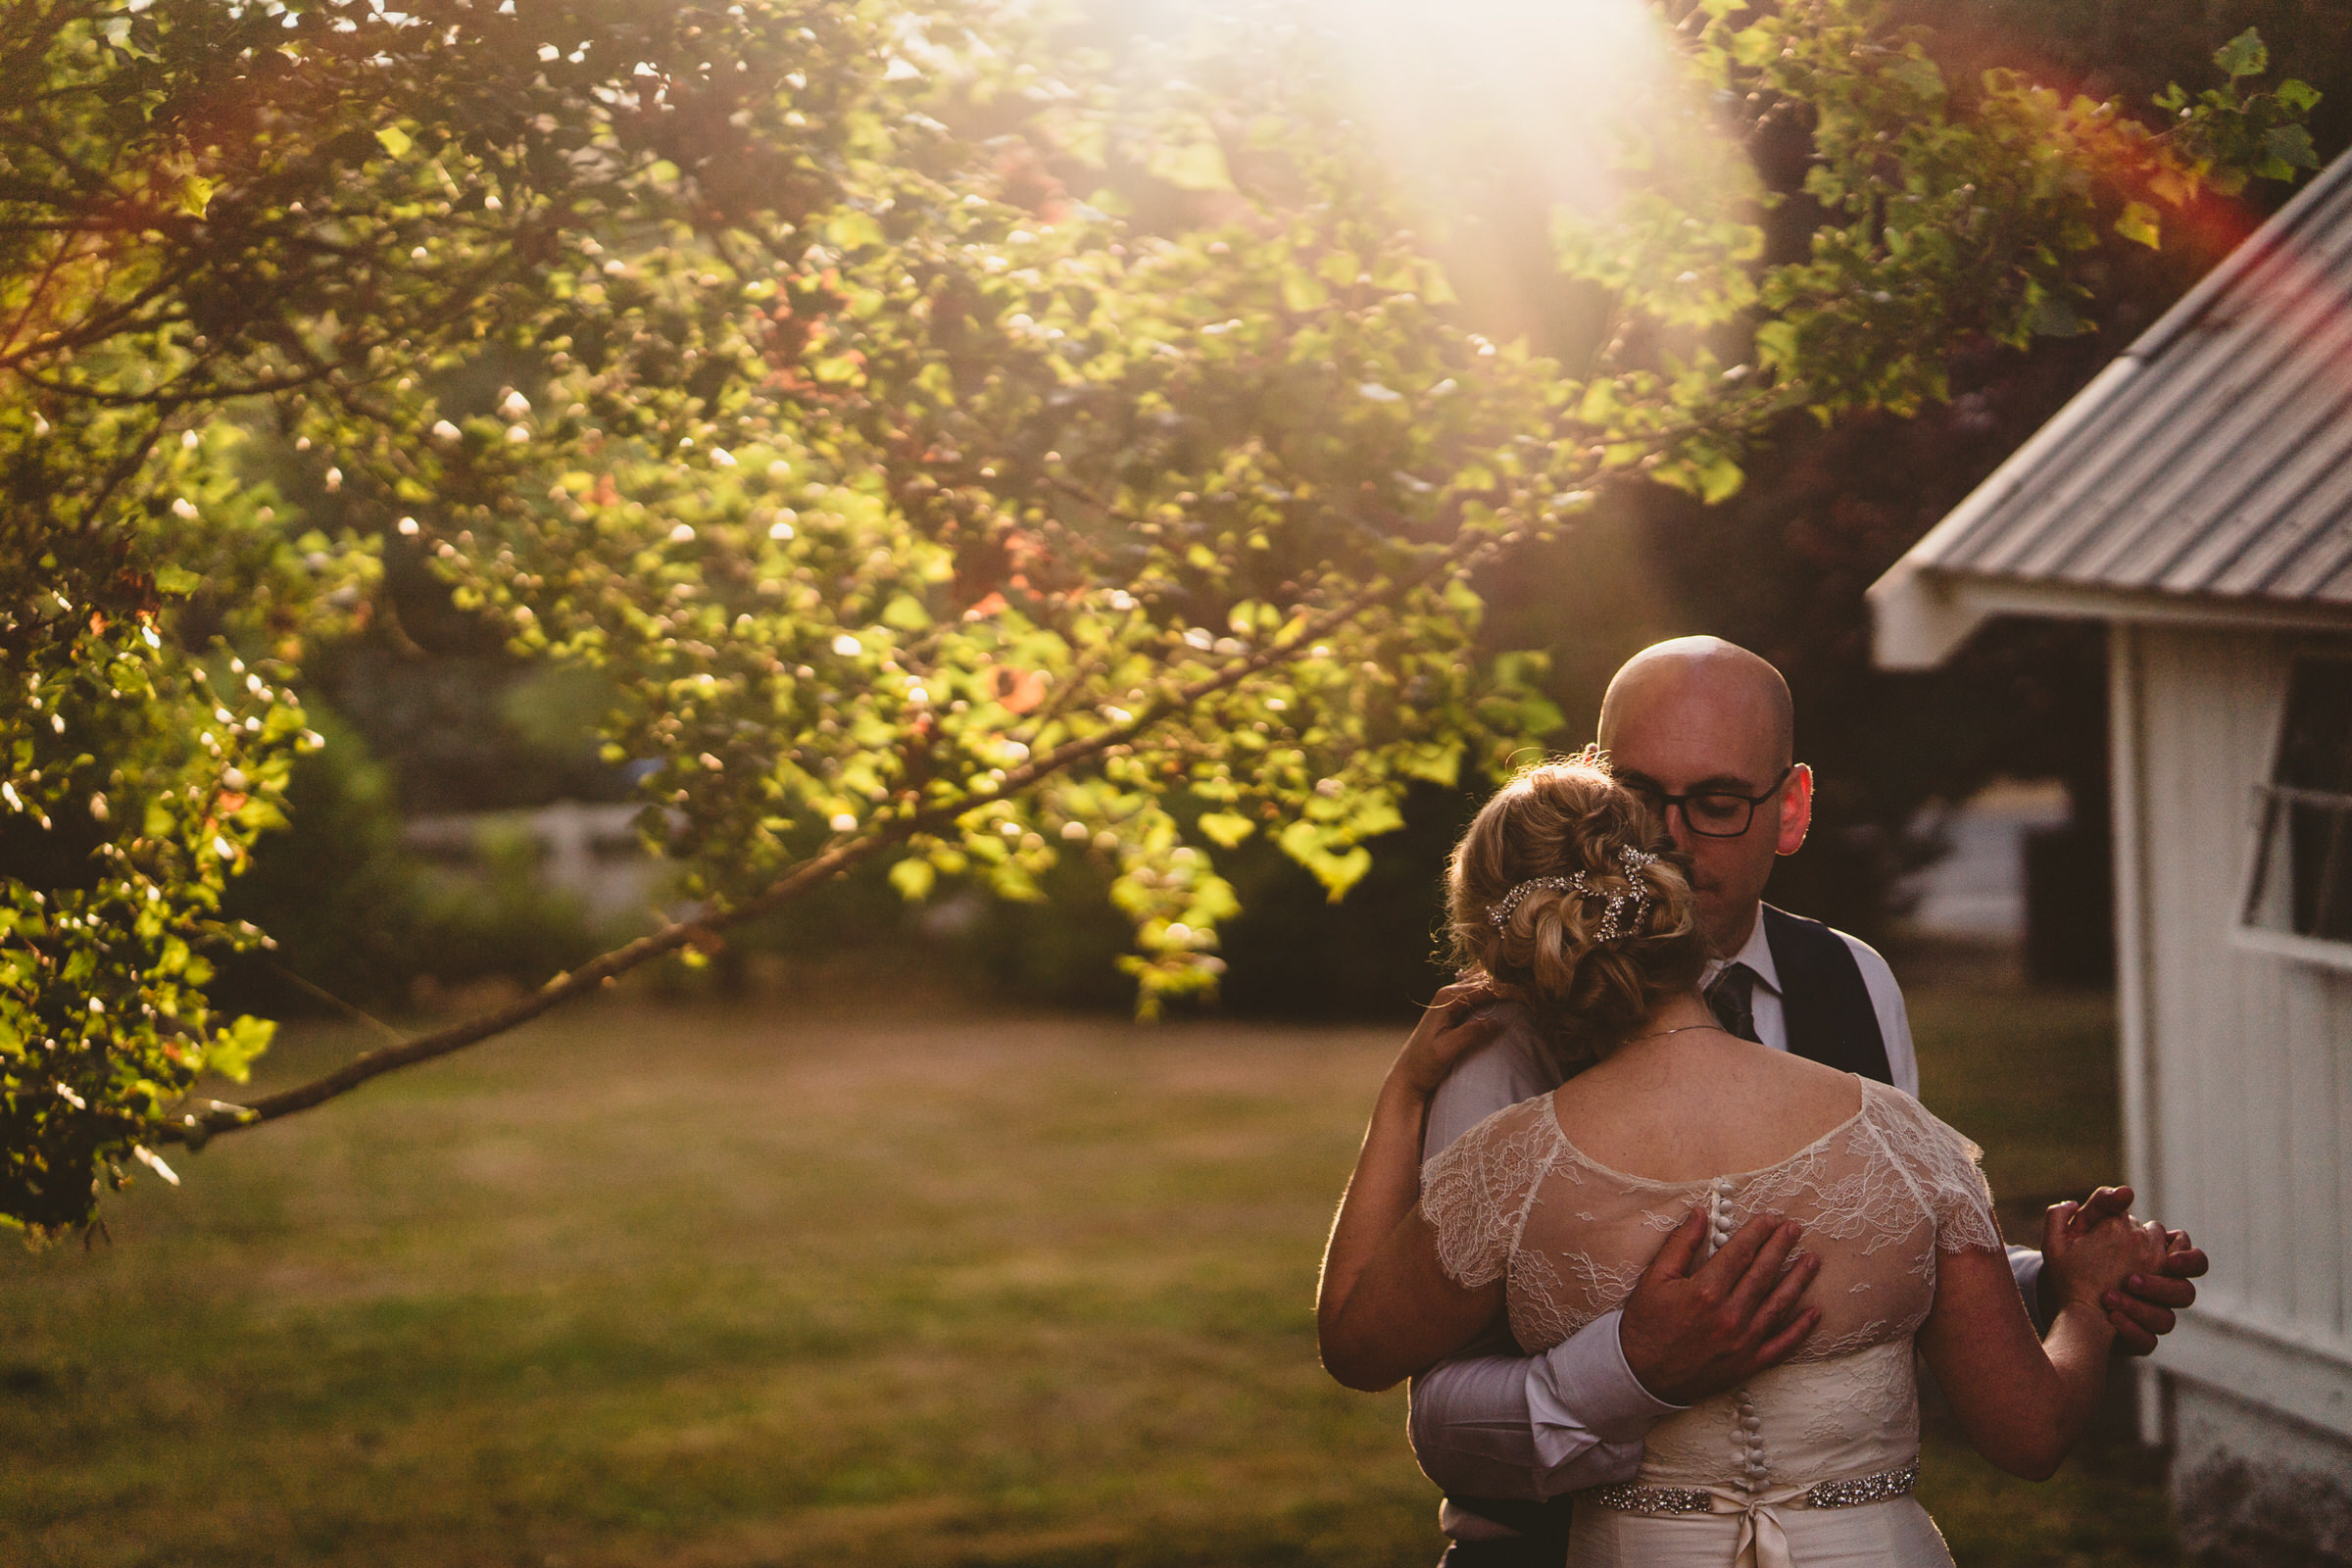 Wayfarer Whidbey Island Wedding: Sara and Joe share a quiet moment away from their reception during golden hour